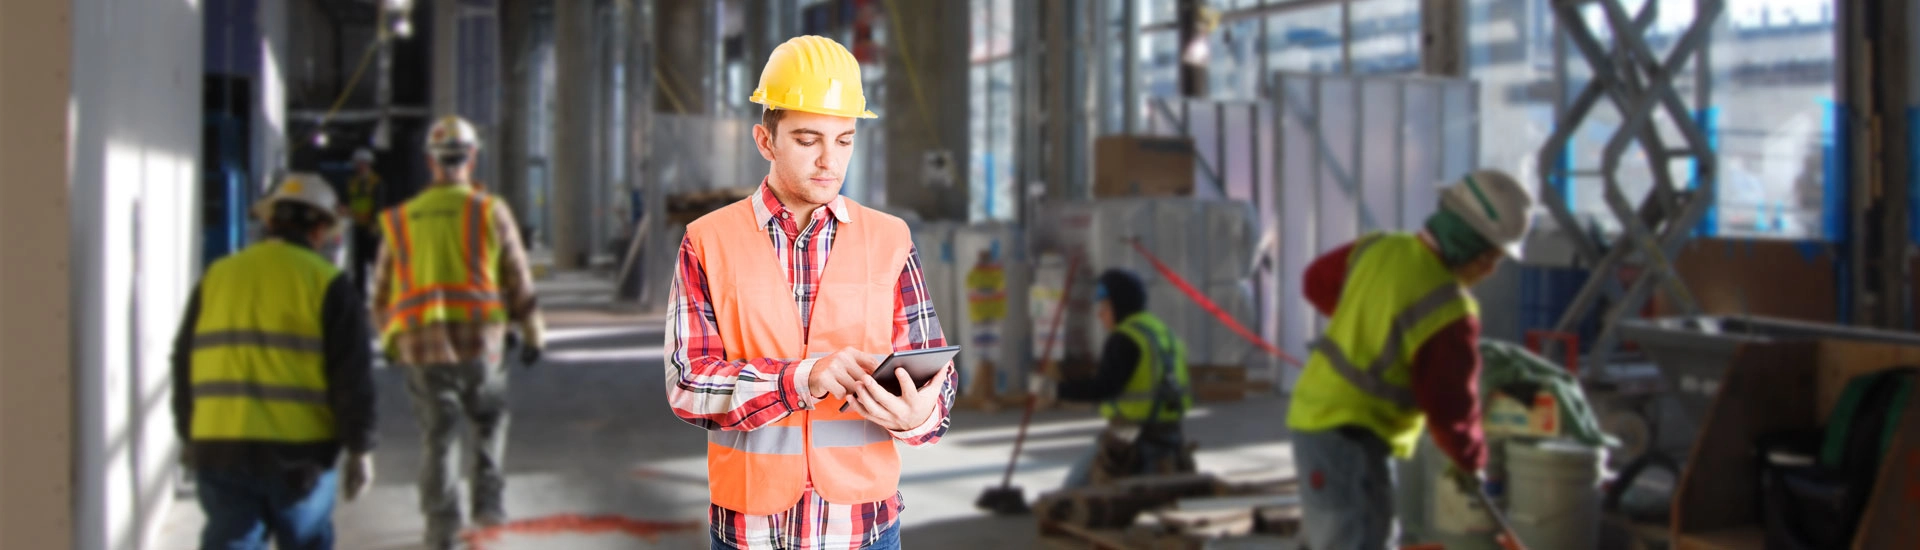 construction worker using a construction management software on his tablet